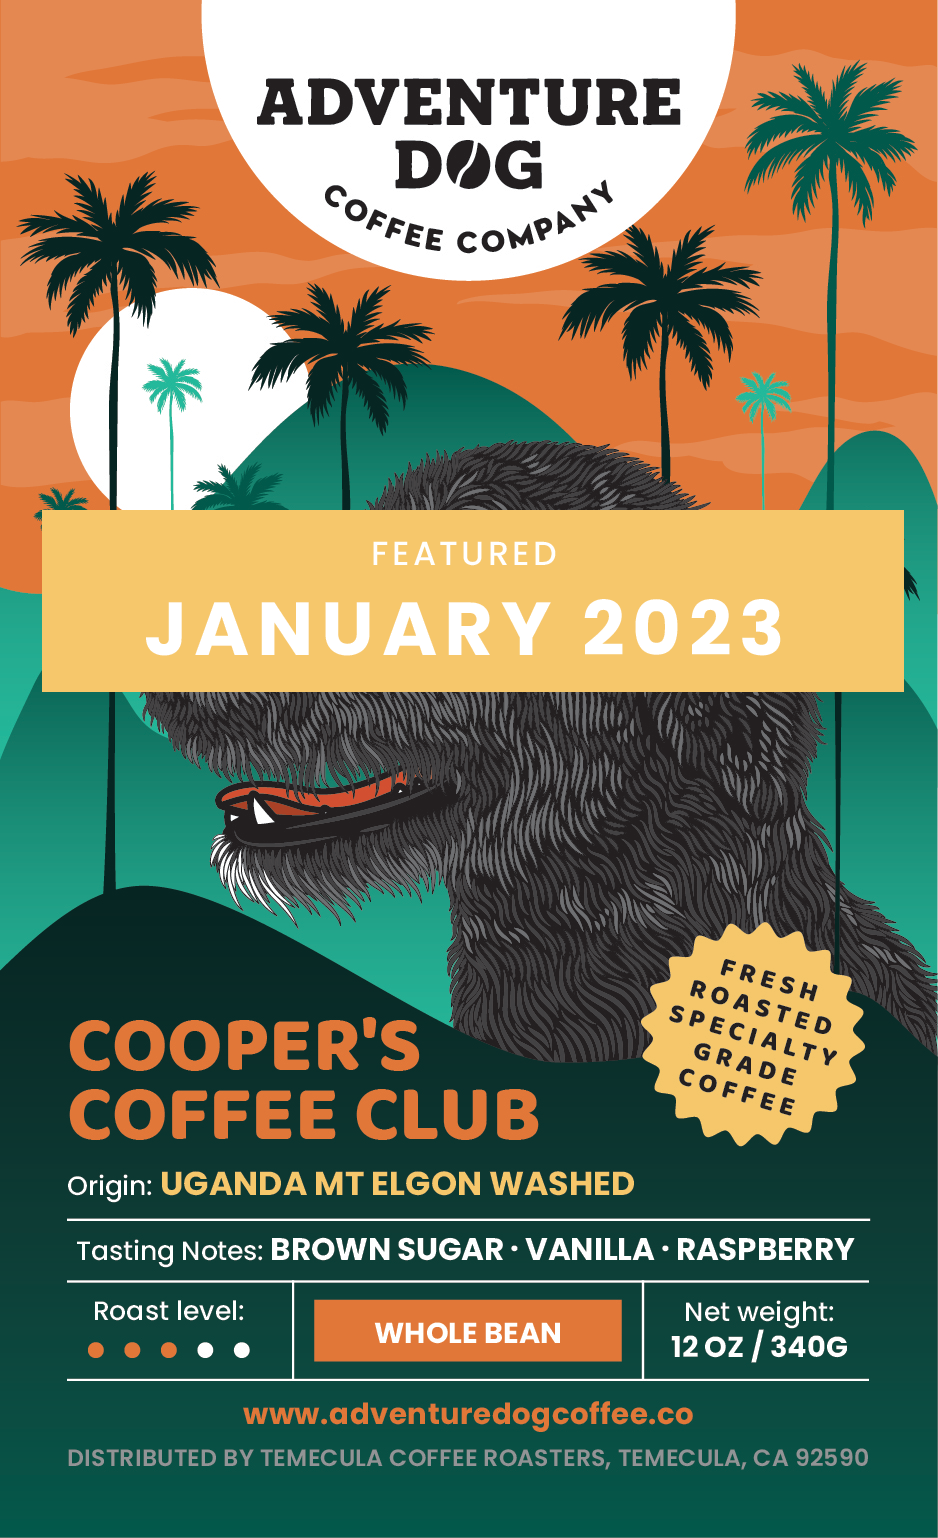 Uganda Mt Elgon Washed: A bag of freshly roasted coffee beans with a label featuring an illustration of the terrier mix Cooper with a coffee farm in the background. This coffee is part of the Cooper's Coffee Club subscription service offered by Adventure Dog Coffee Co.